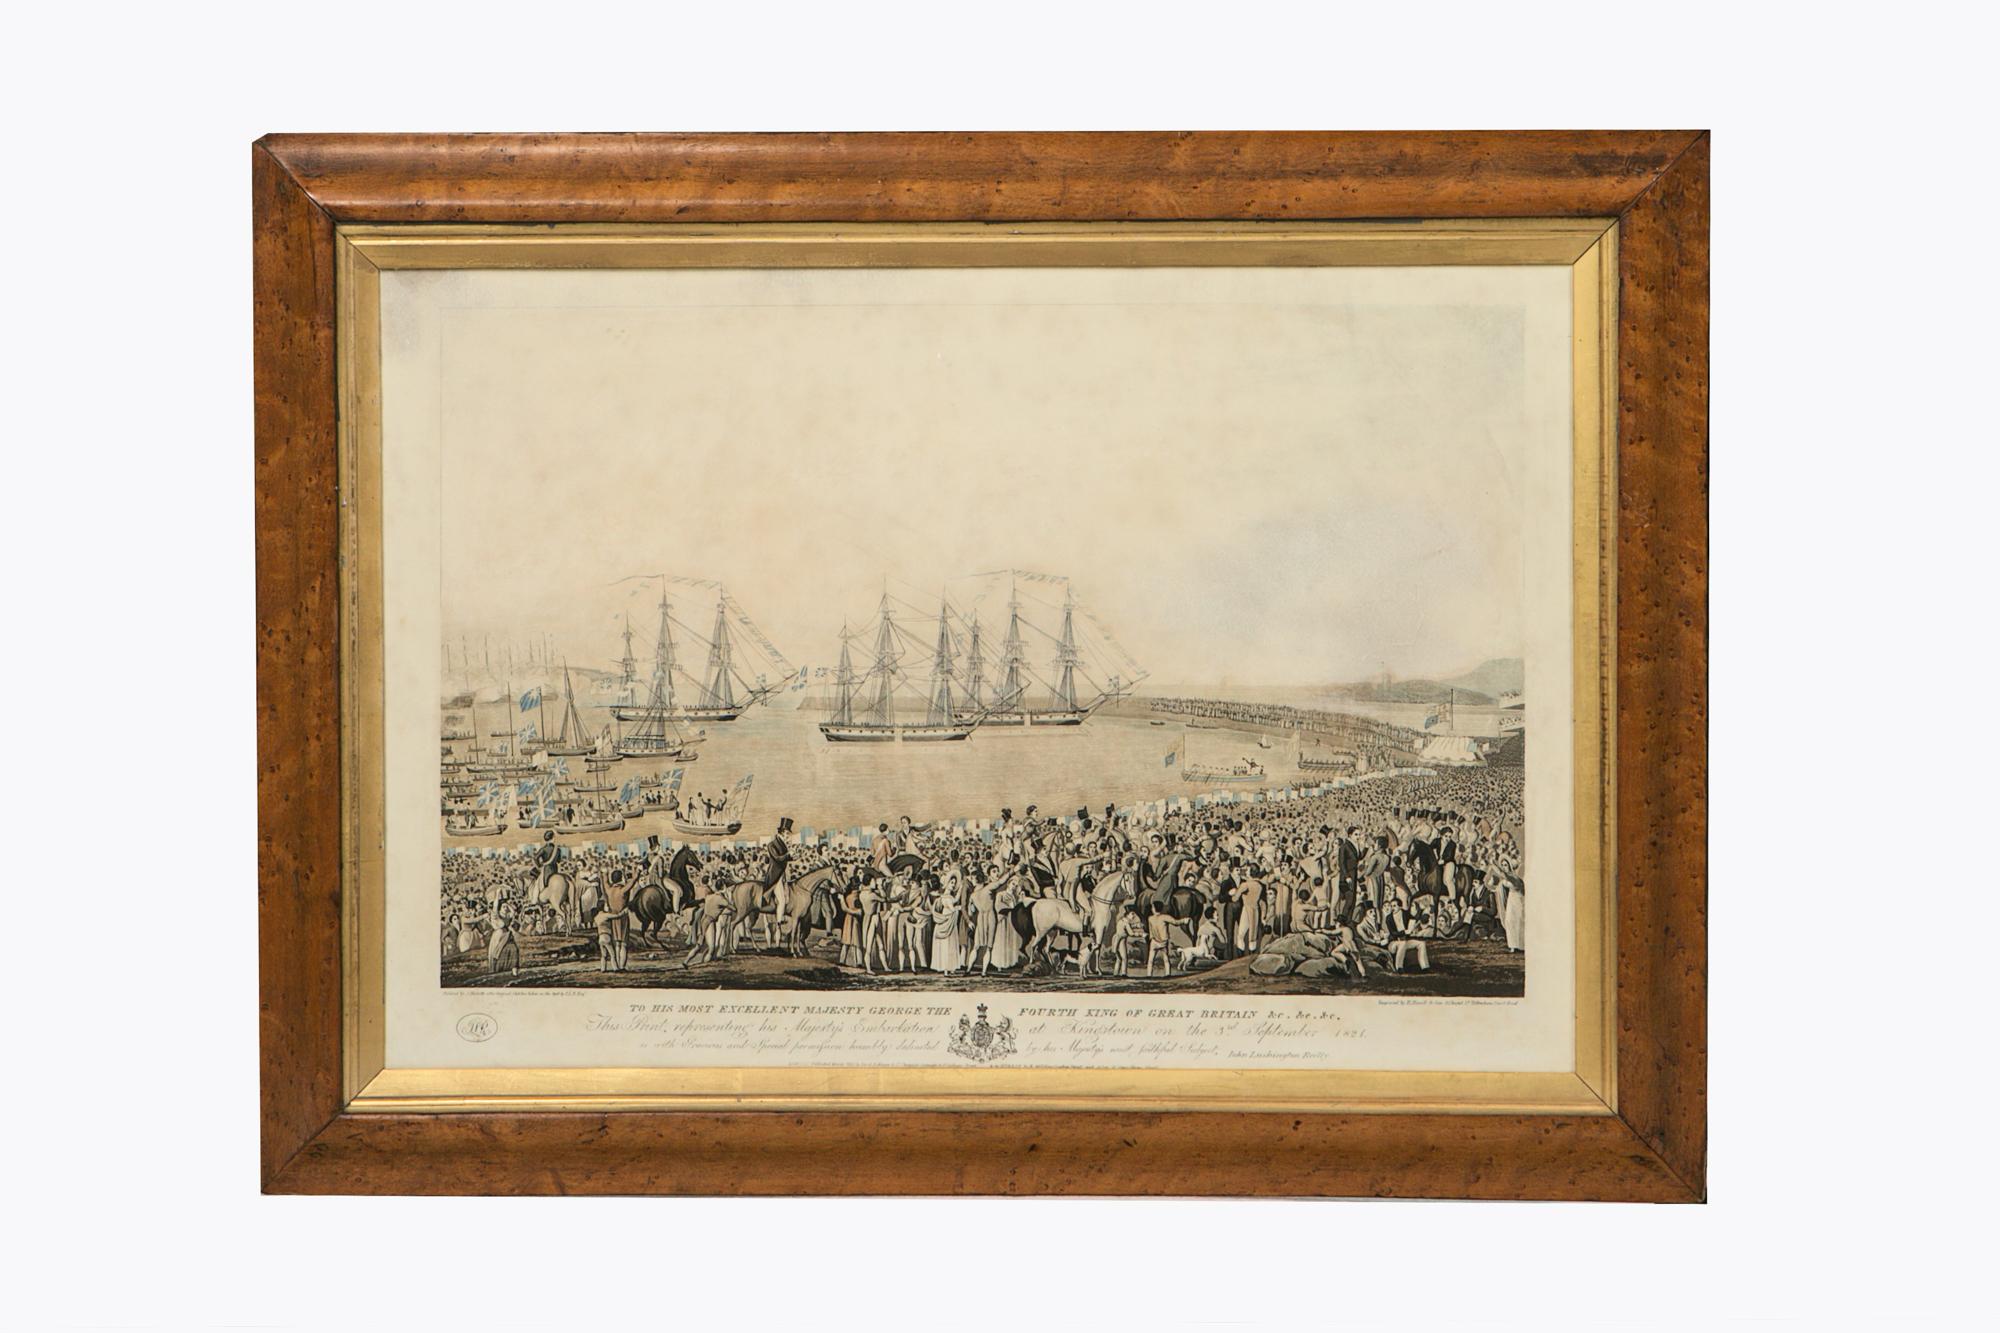 Early 19th century pair of engravings - 'George IV visiting Dublin'

After Joseph Haverty RHA (1794-1864) 'The Triumphant Entry of George IV into Dublin'. 'His Majesty's Arrival', 'His Majesty's Embarkation'. A pair of coloured aquatints by Robert